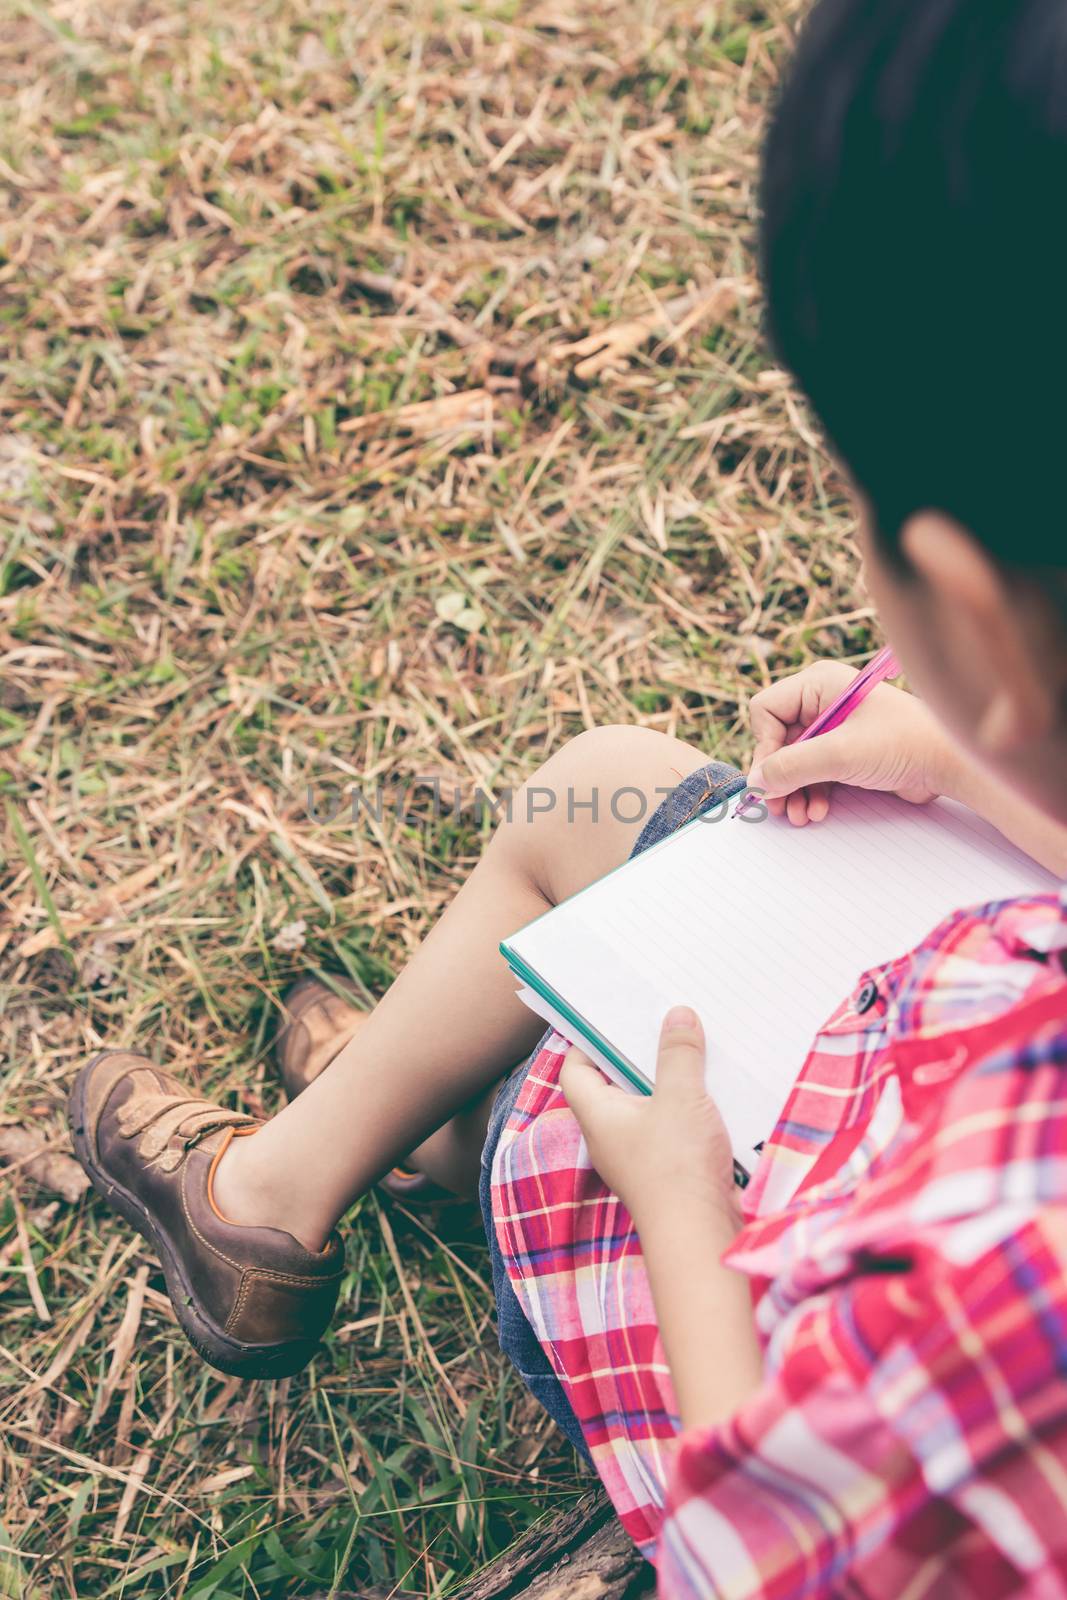 Back view. Child use pen to writing on notebook on wooden log in park. Outdoors in the day time with bright sunlight. Use it for learning or education concept. Vintage style.